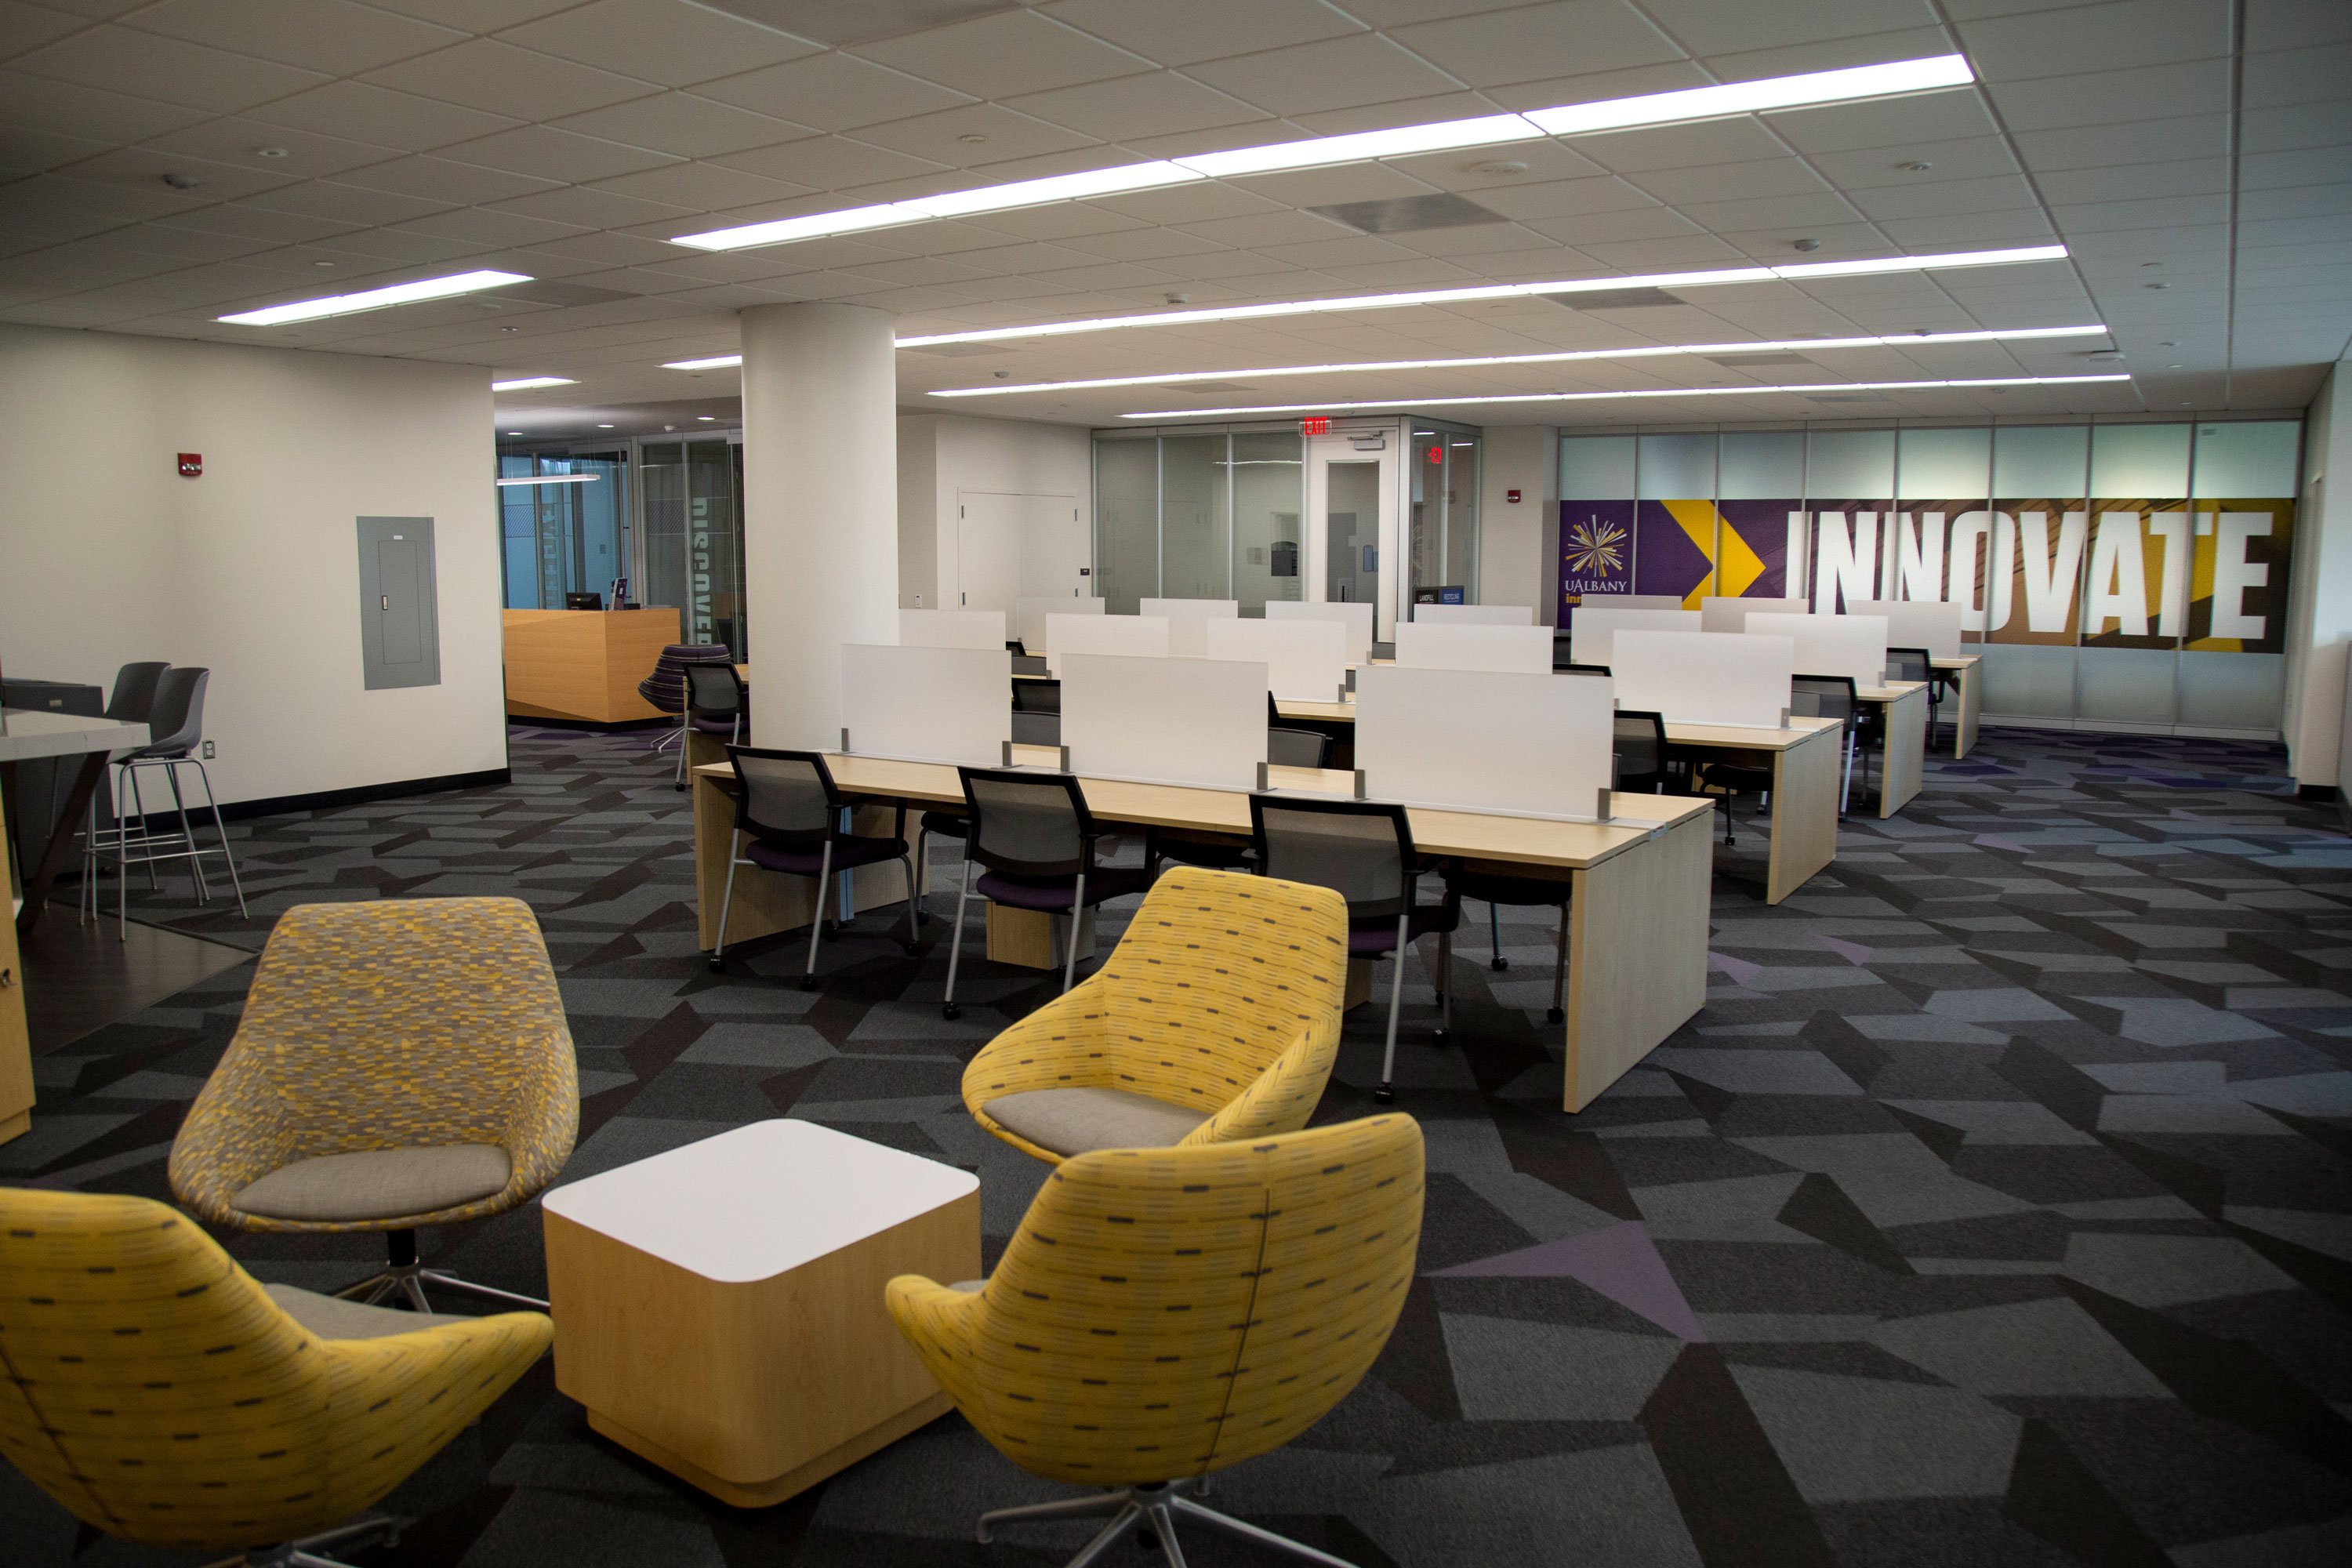 The inside of the UAlbany Innovation Center, with four yellow chairs around a coffee table and about 40 shared workstations situated in front of the Innovate sign.